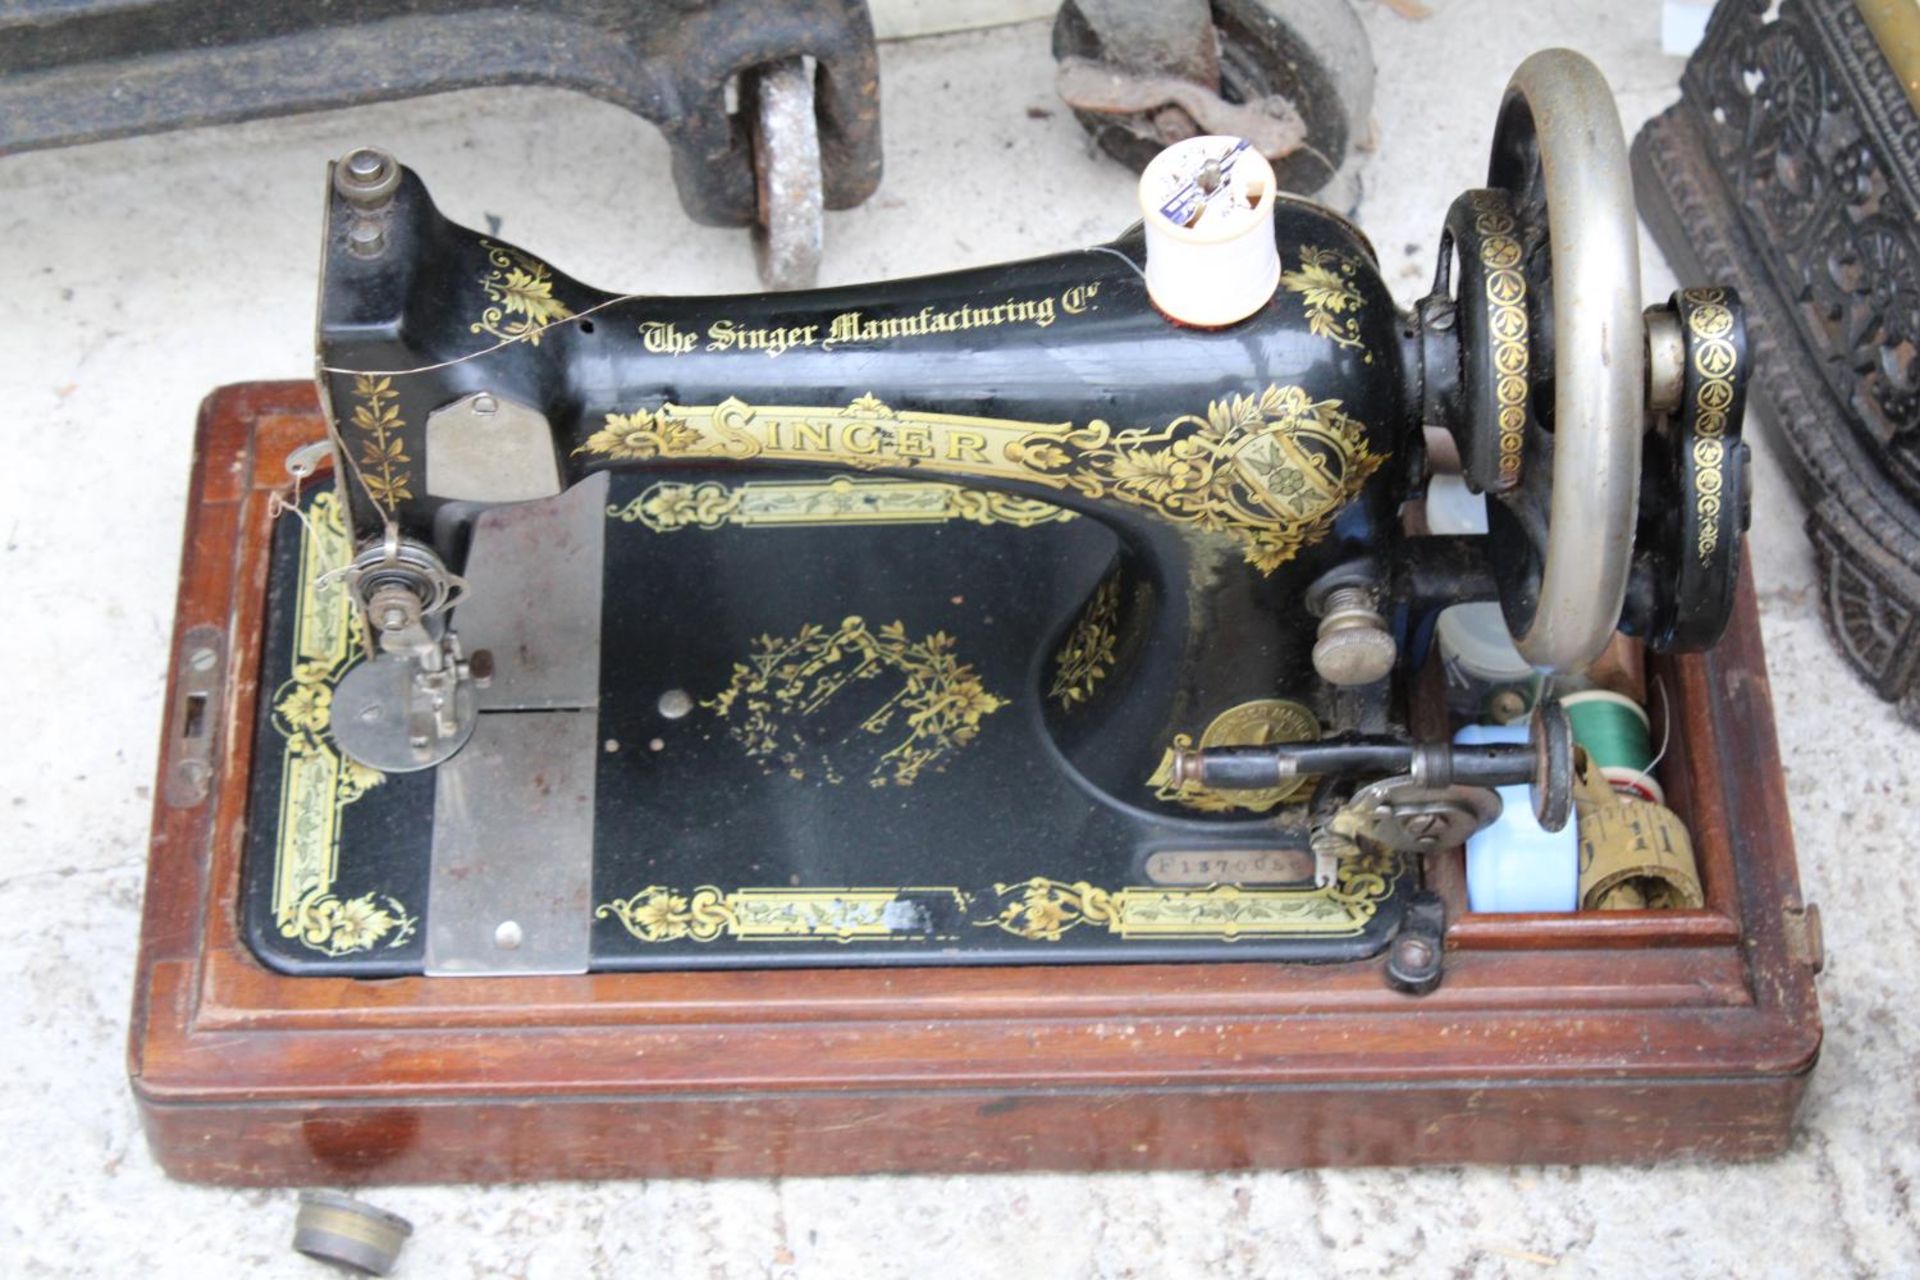 A VINTAGE SINGER SEWING MACHINE WITH WOODEN CARRY CASE - Image 2 of 4